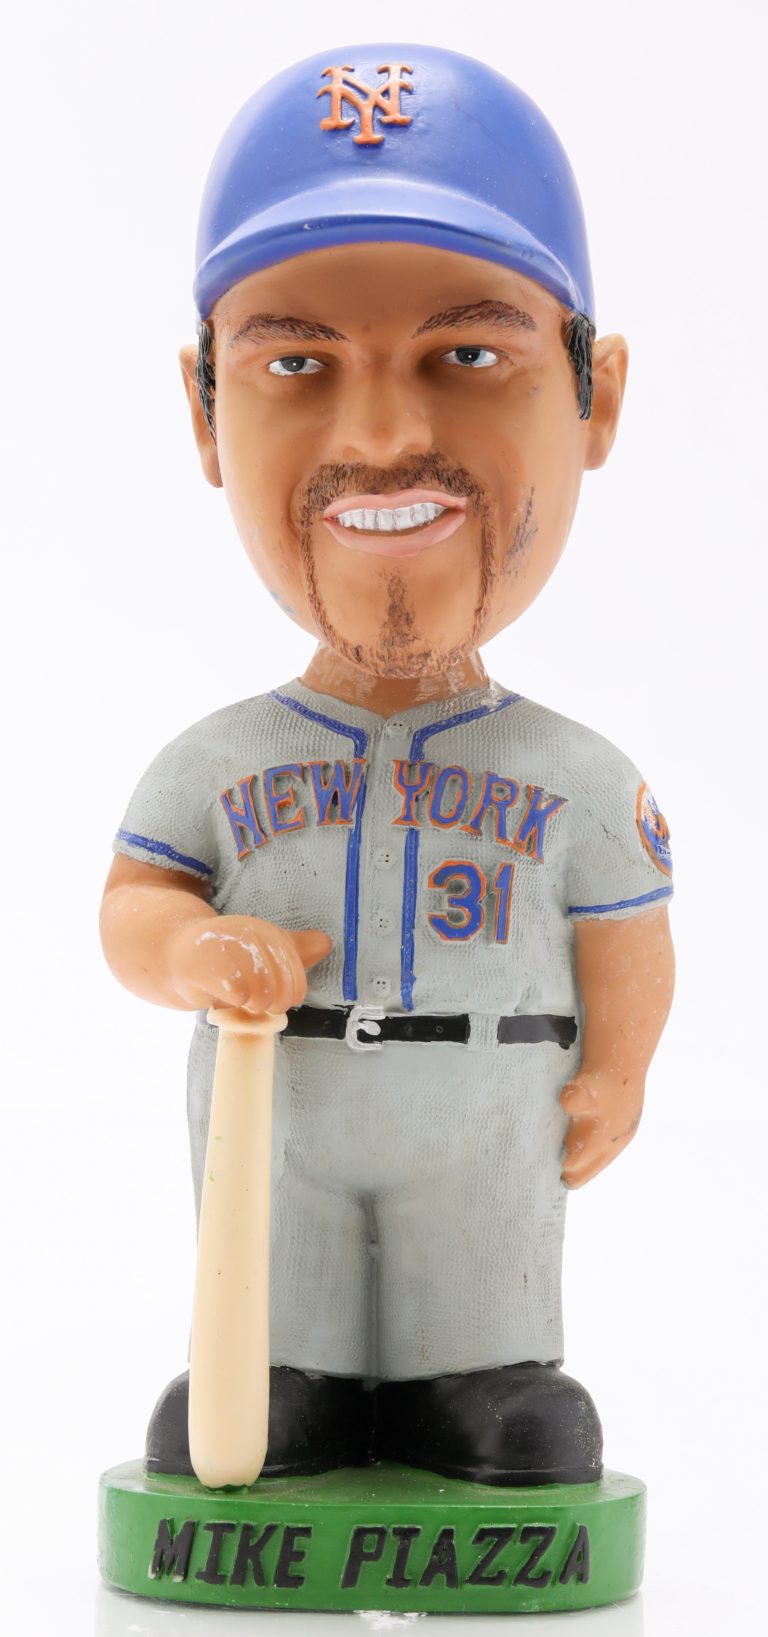 Mike Piazza NY Mets Bobblehead - Mets History